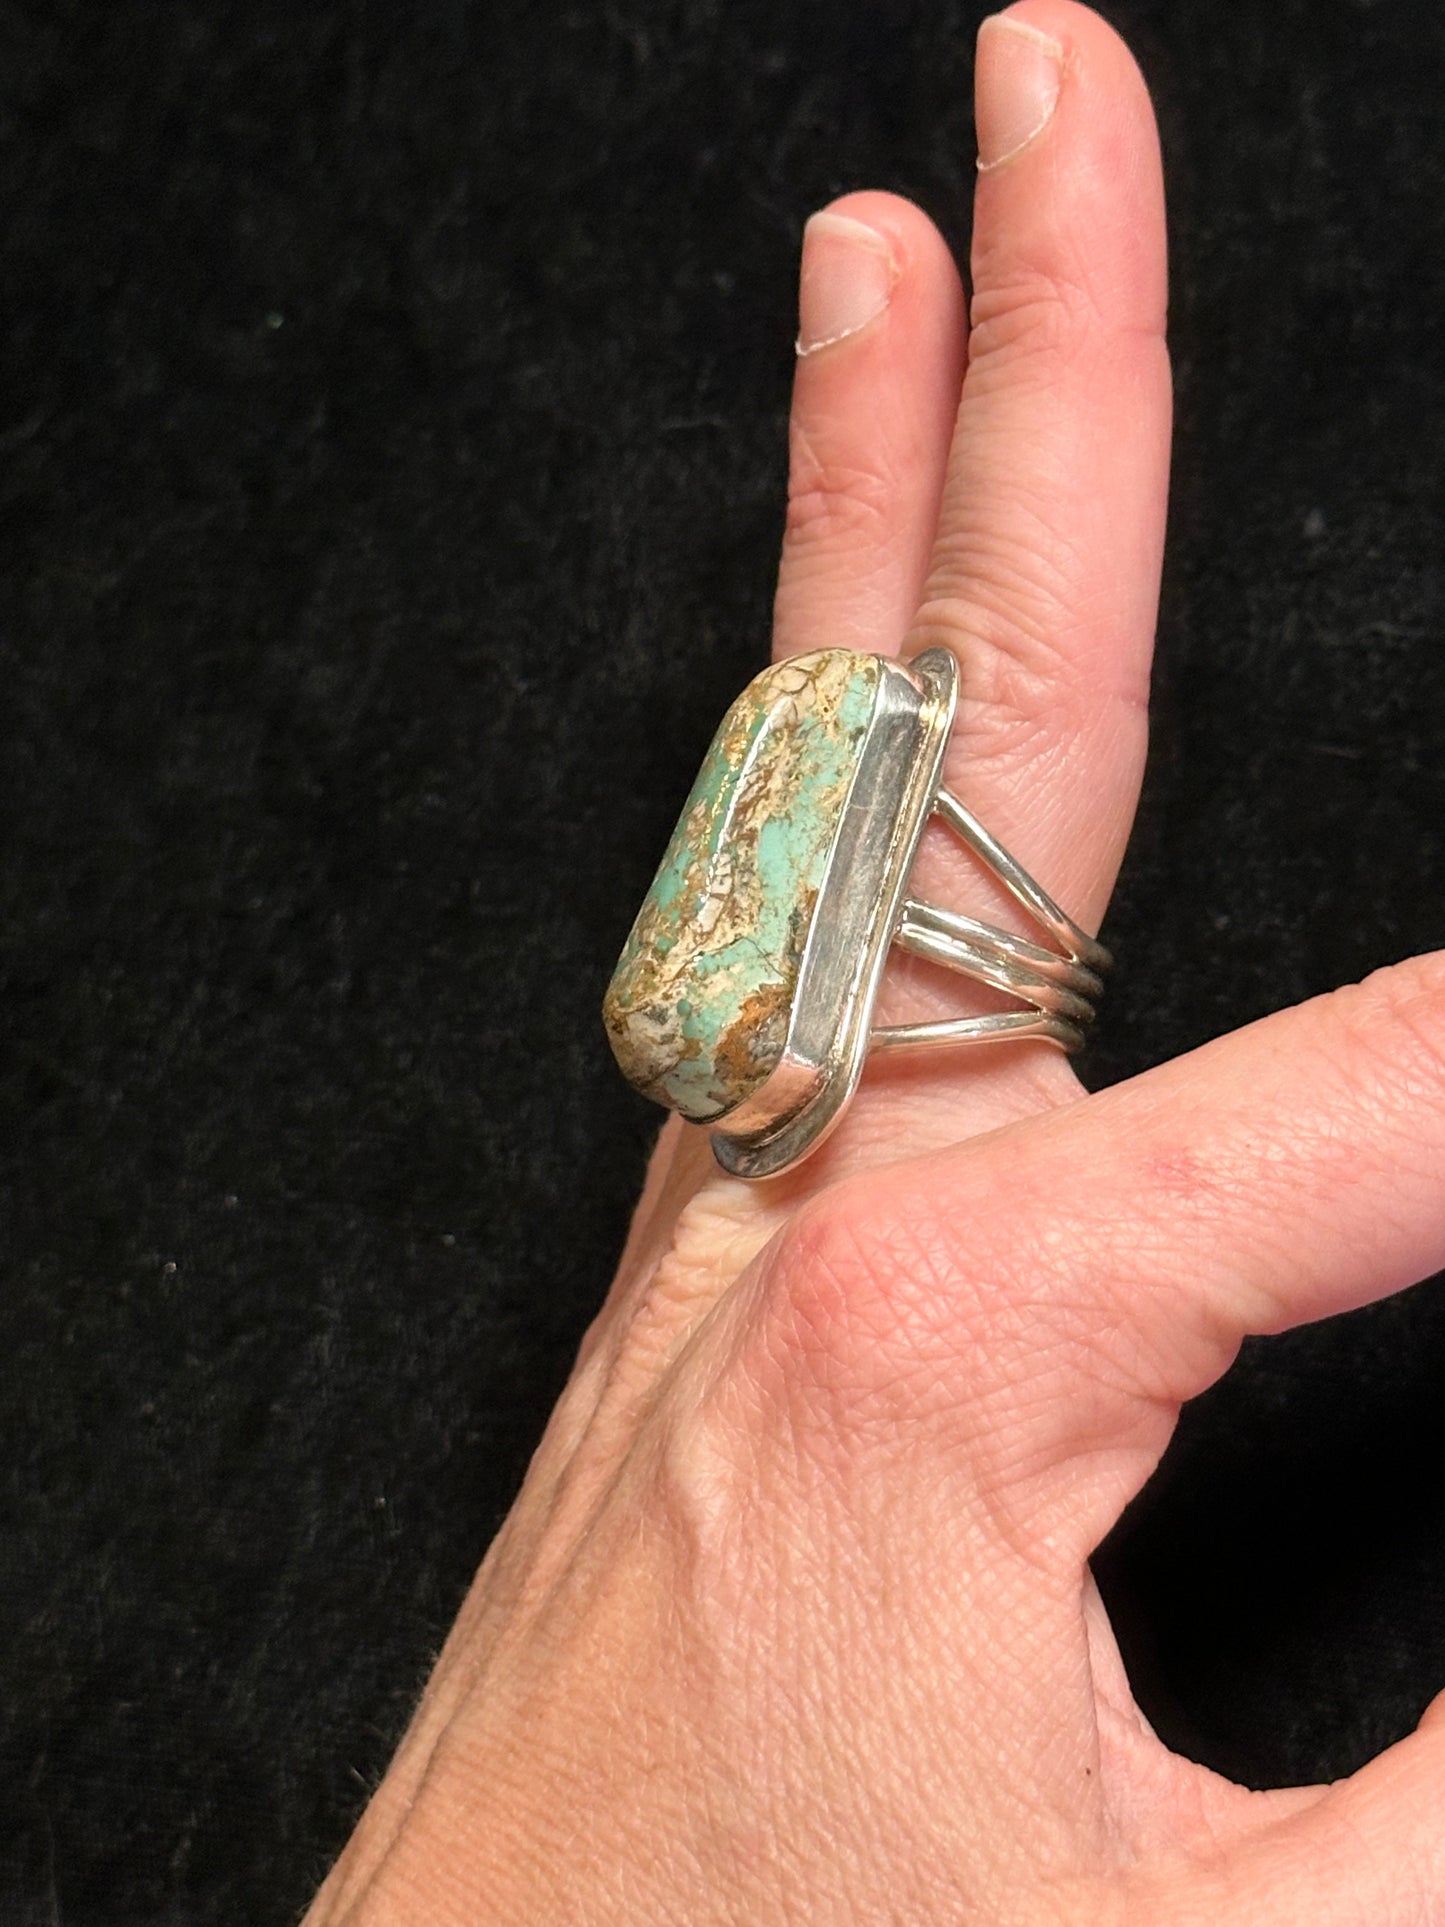 8.0 Carico Lake Turquoise Ring by Tommy Jackson, Navajo